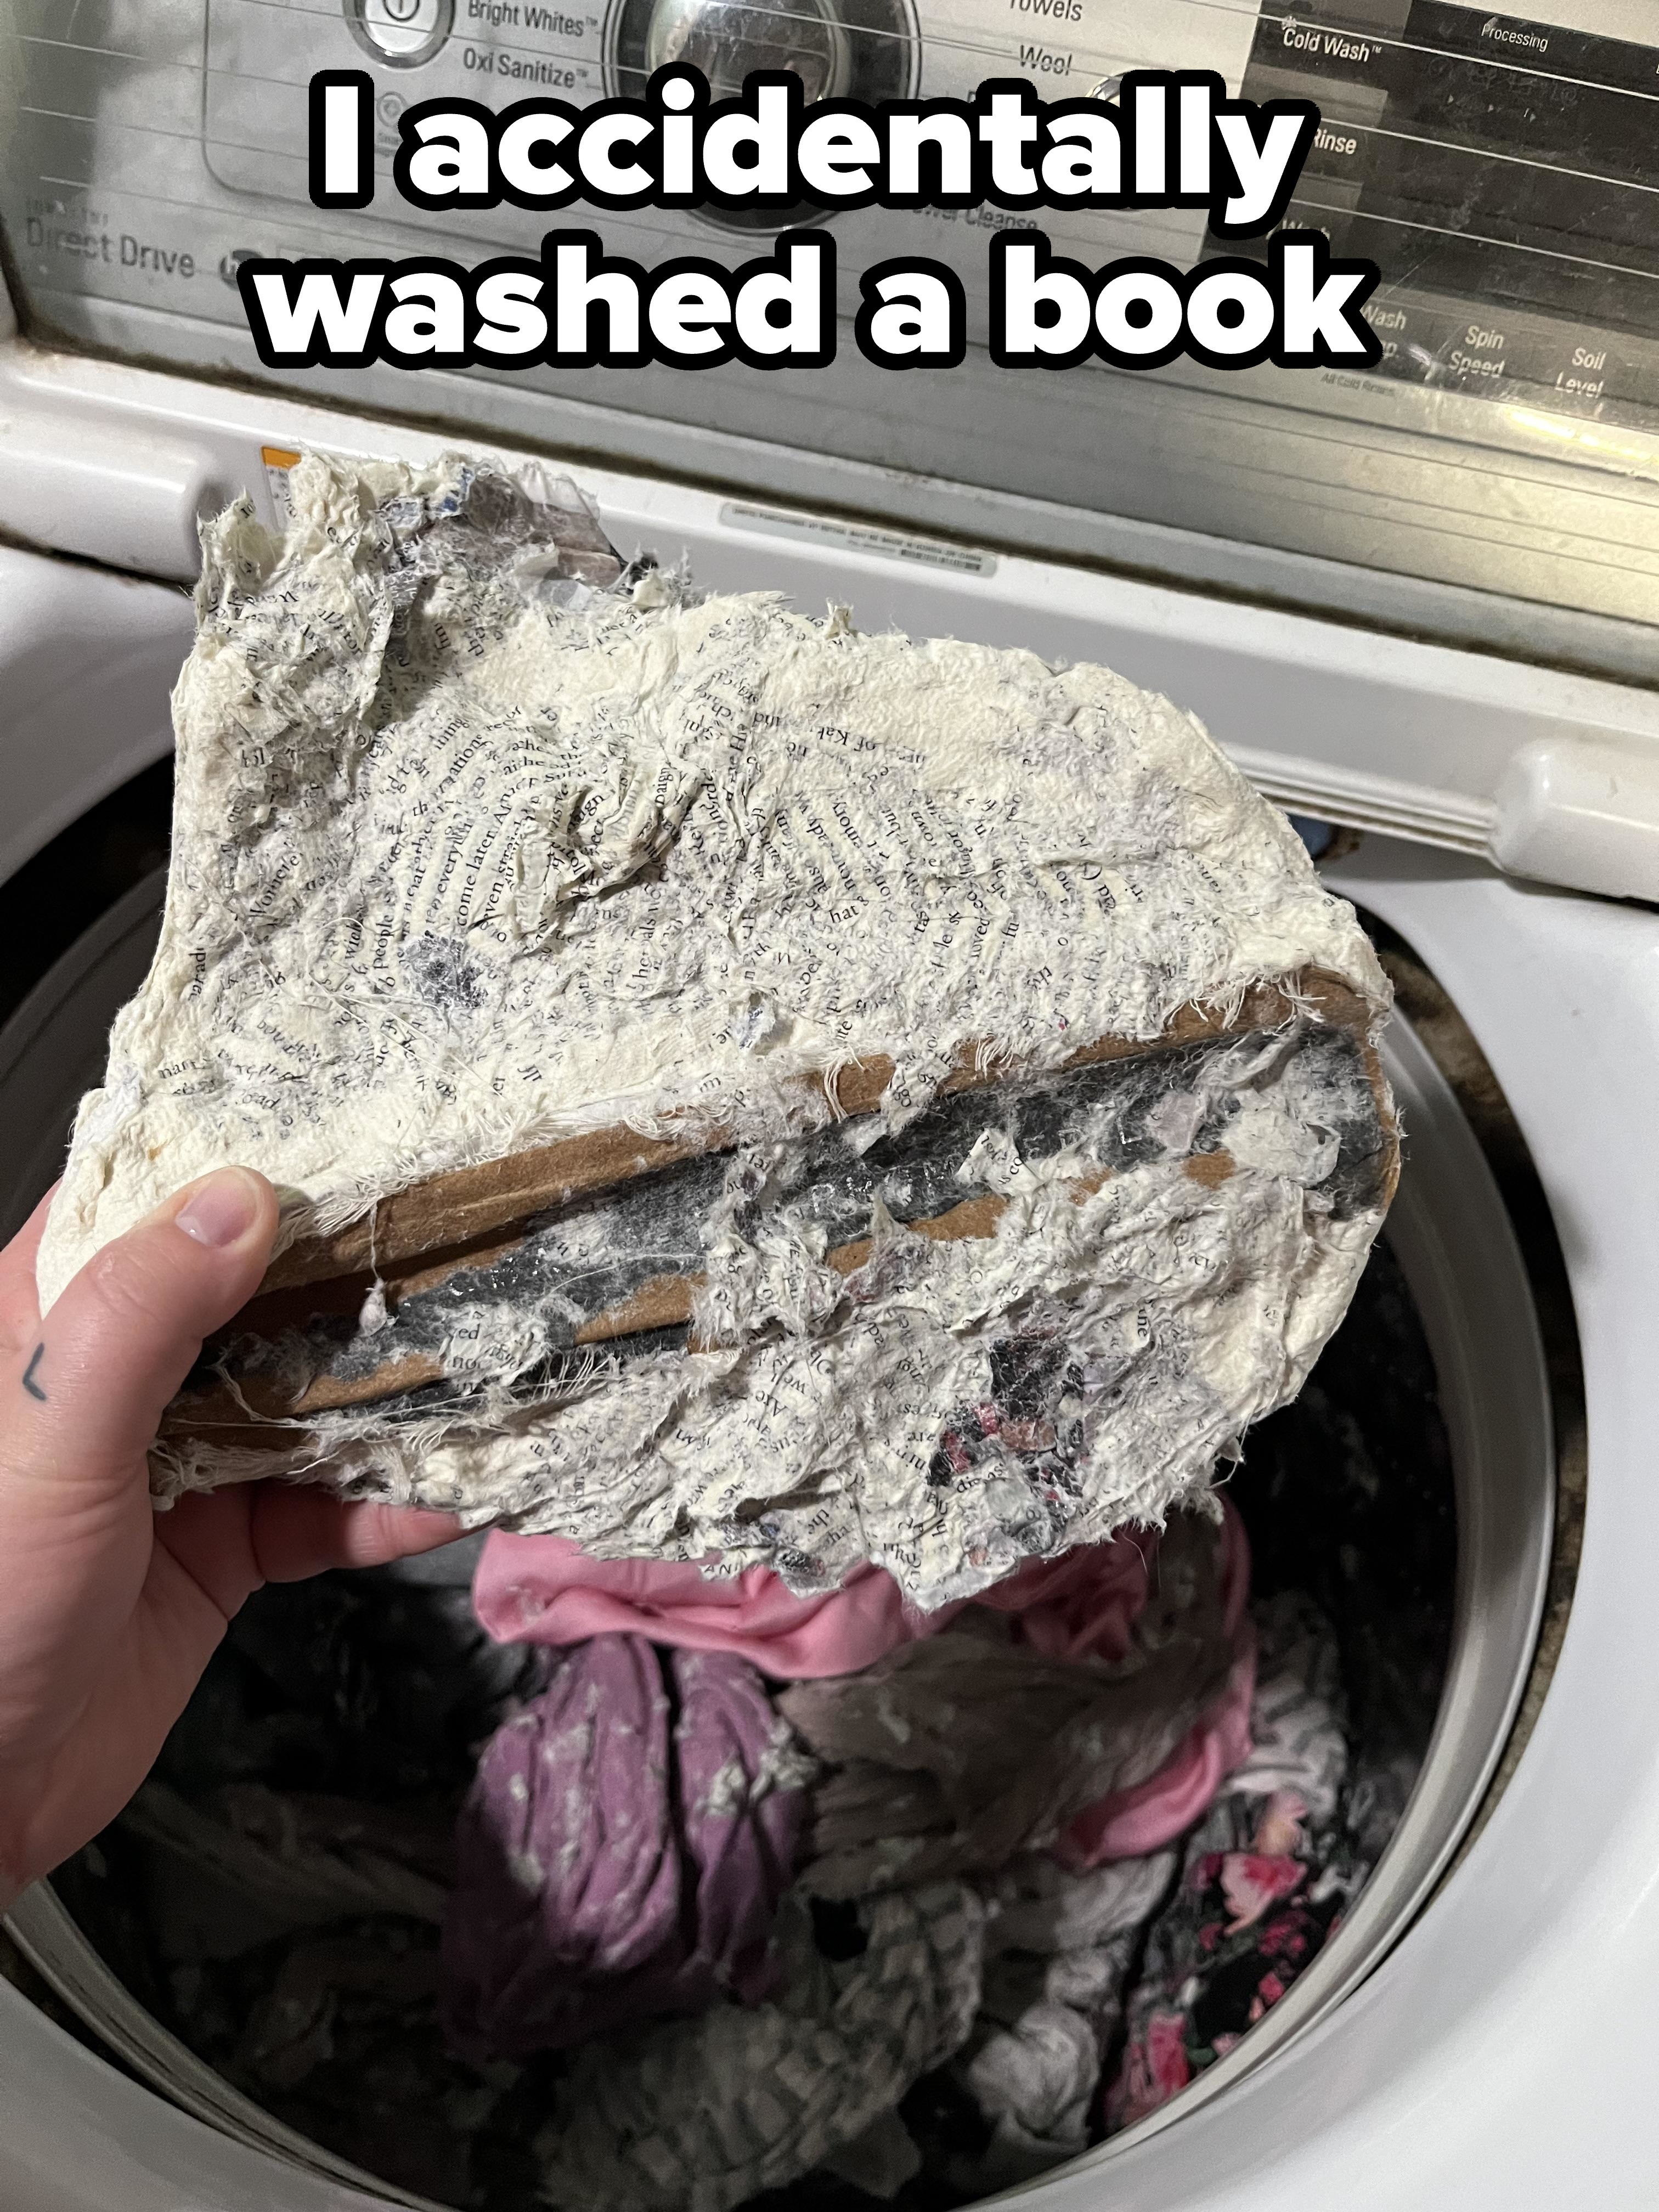 &quot;I accidentally washed a book&quot;